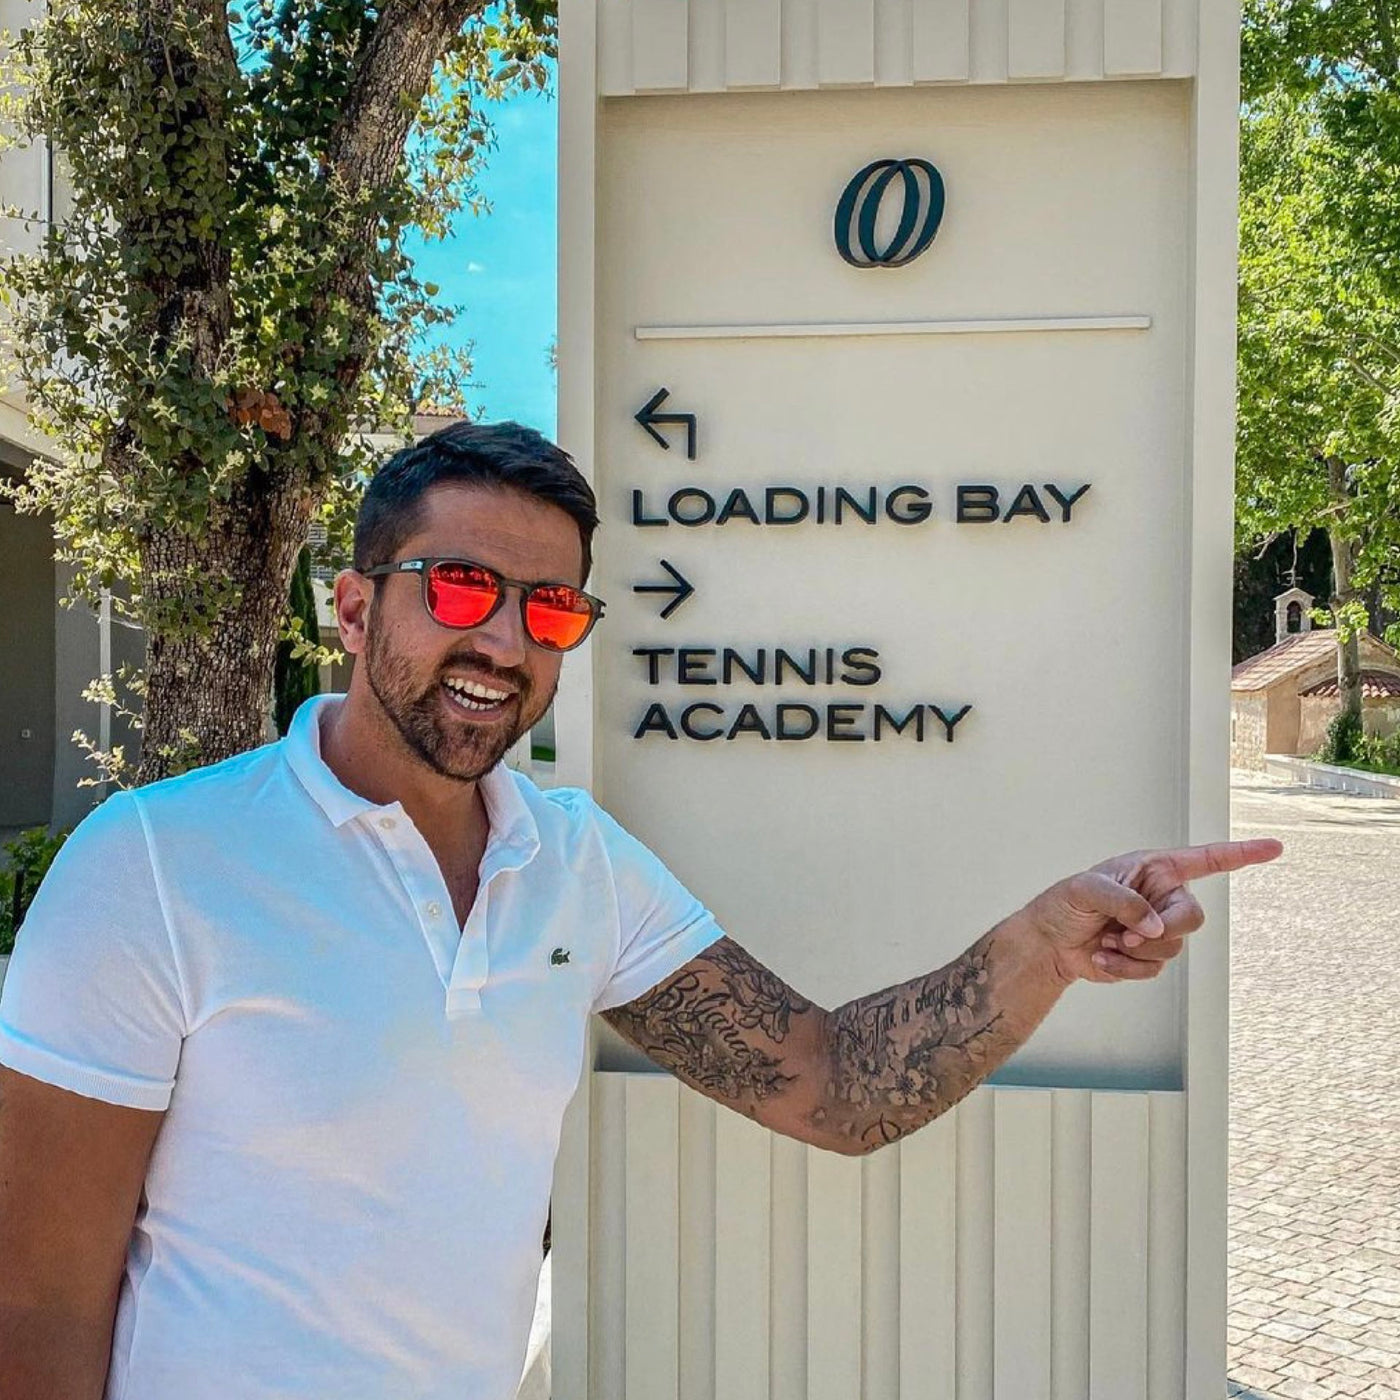 Janko Tipsarevic - Former Top 10